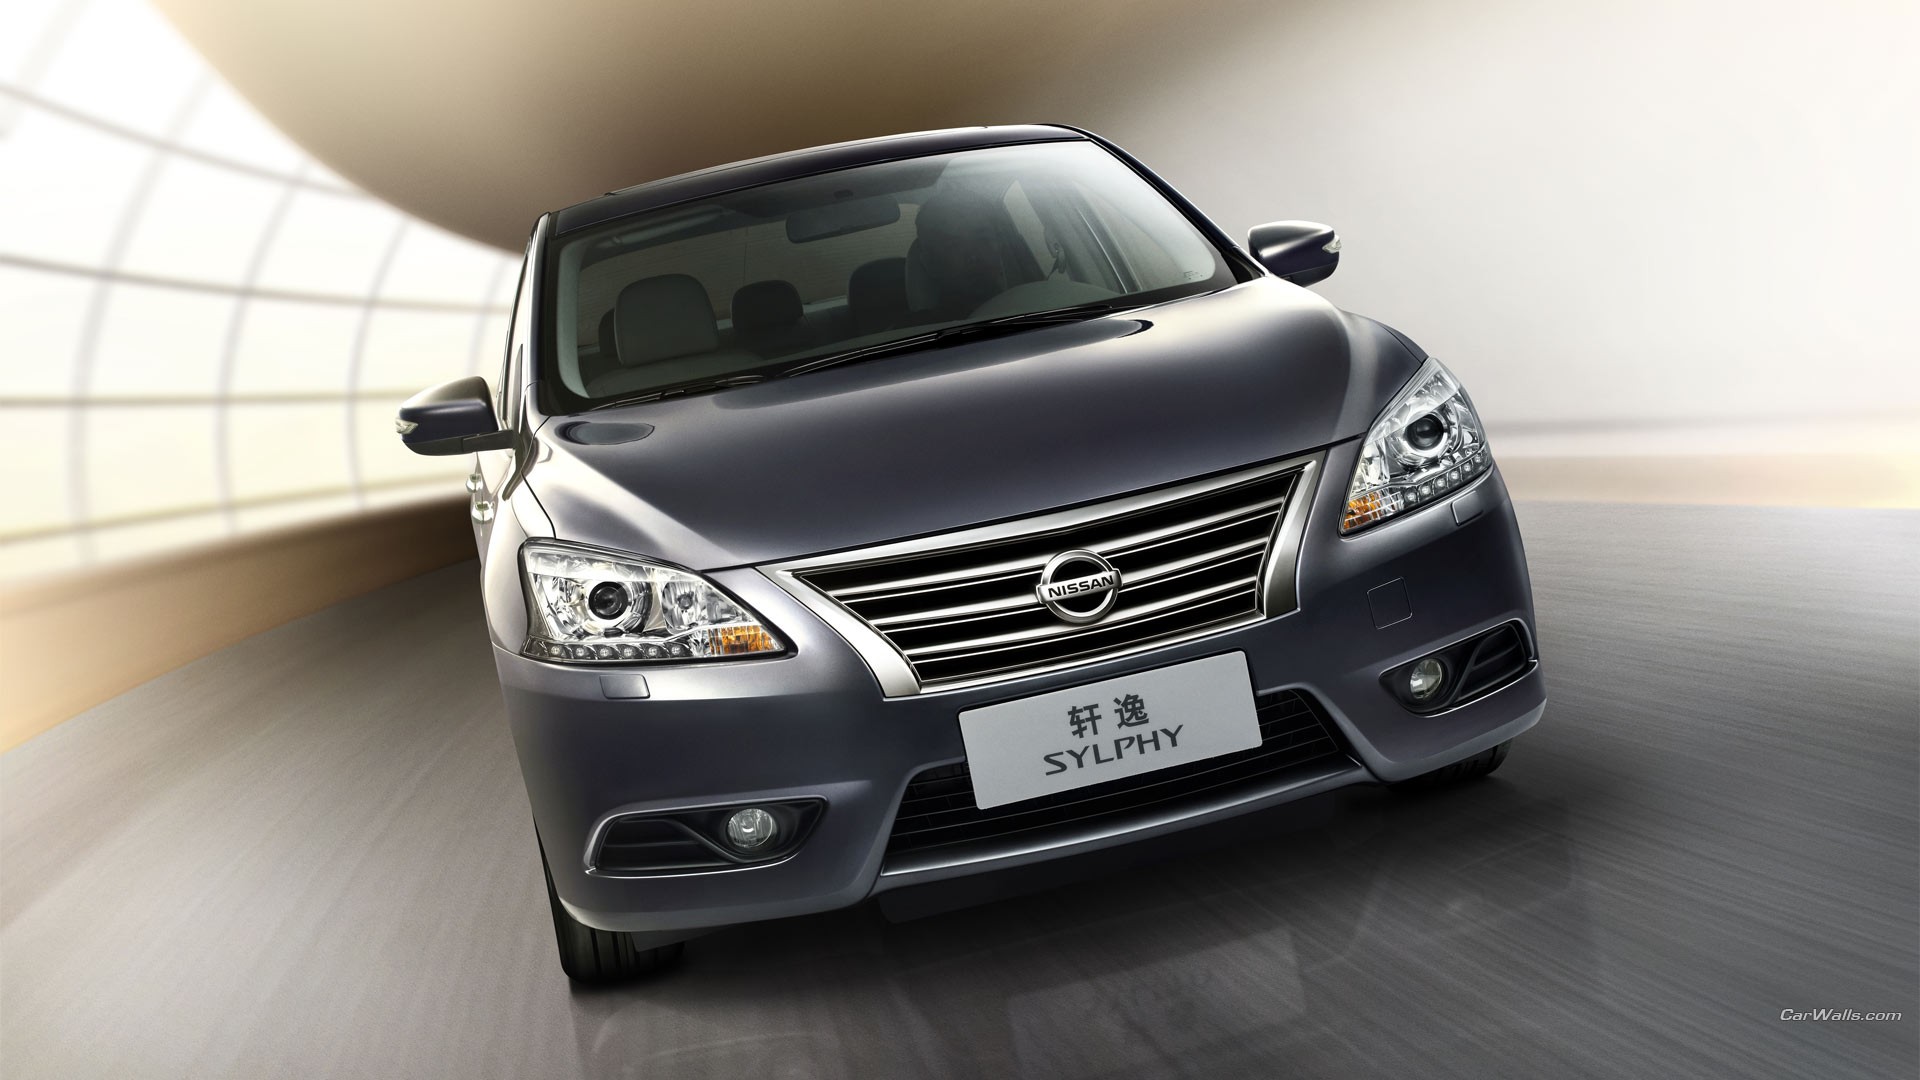 Nissan Sylphy, Concept Cars Wallpaper